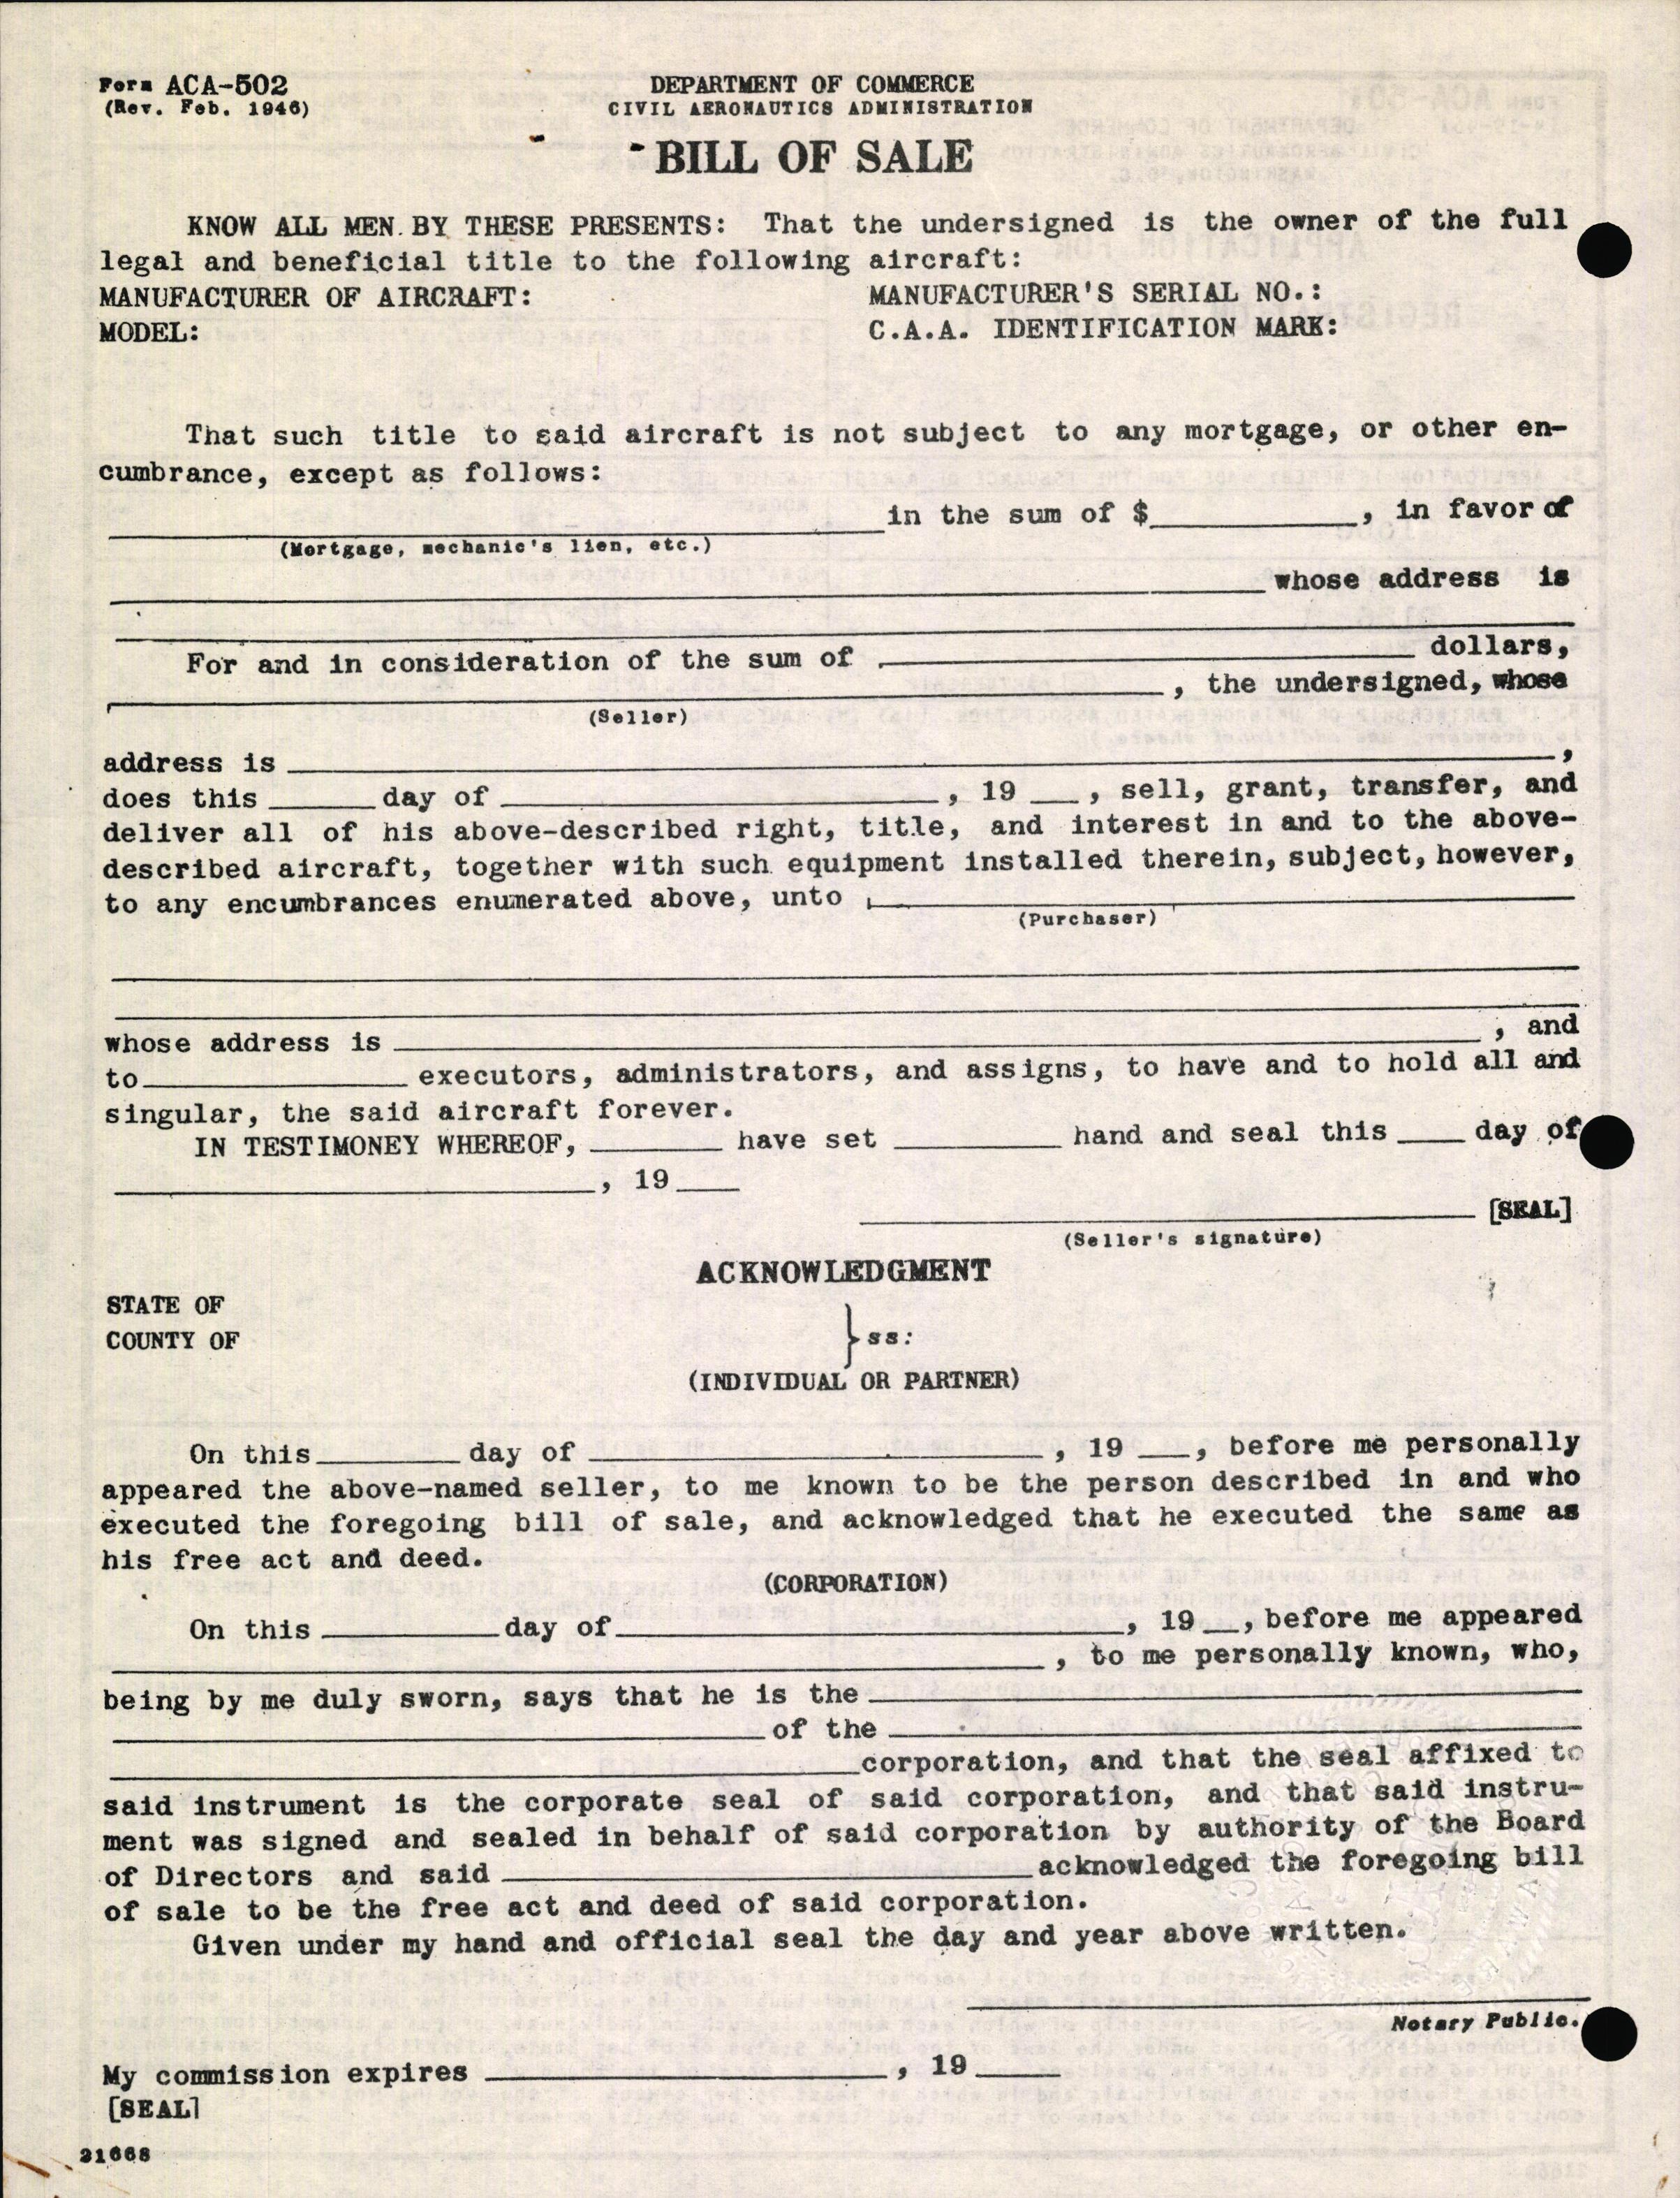 Sample page 2 from AirCorps Library document: Technical Information for Serial Number 2136